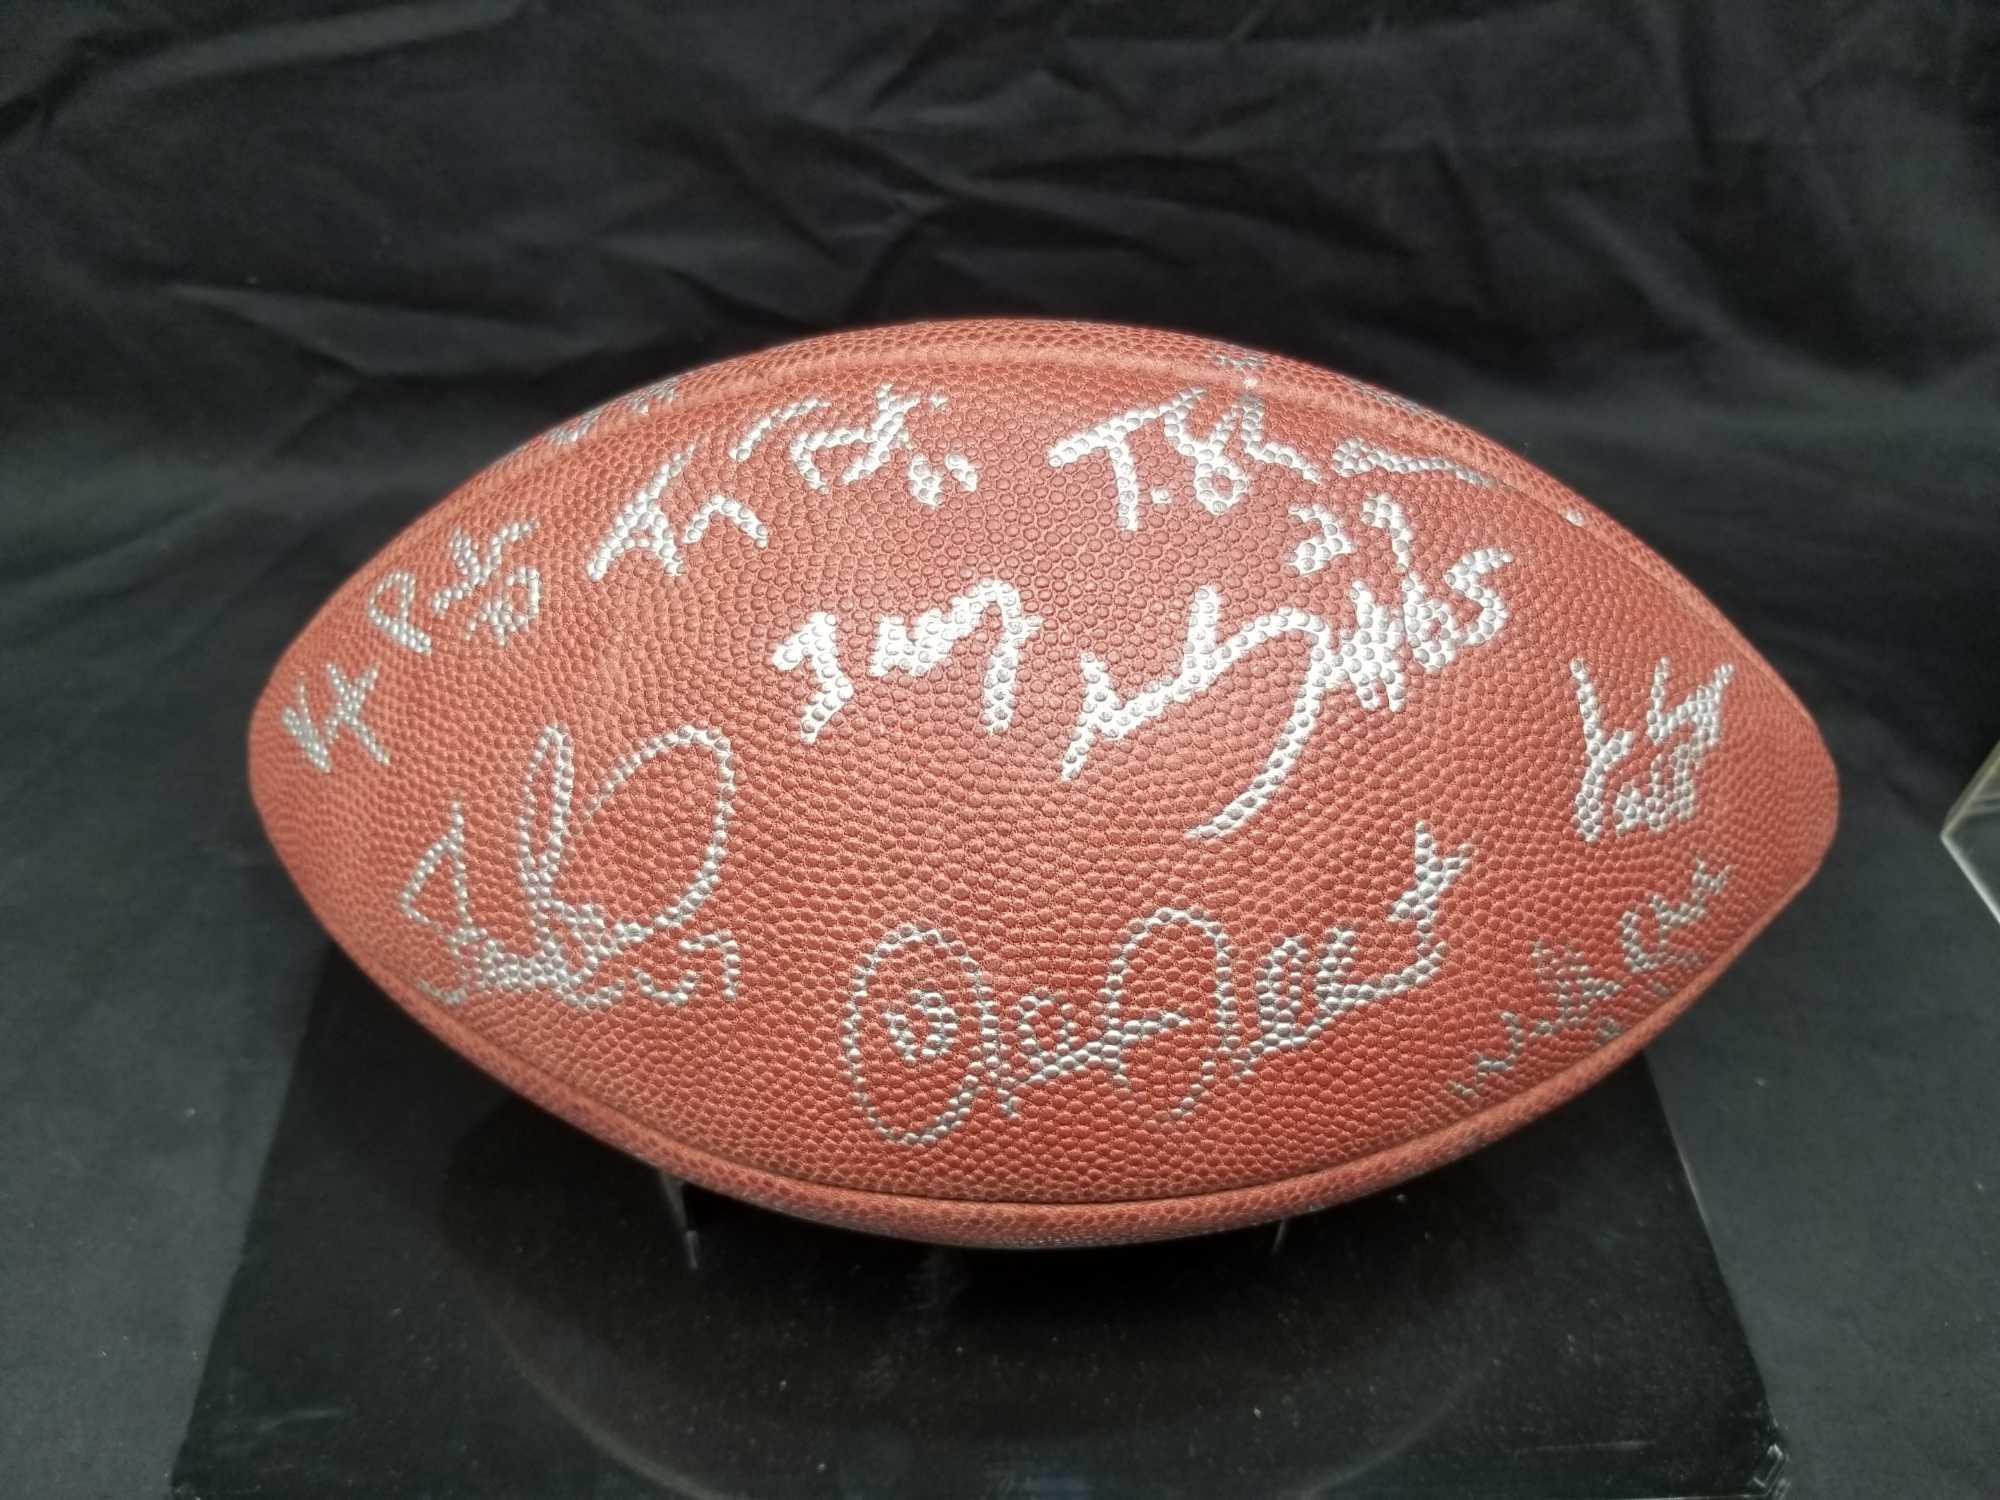 1995 San Diego Chargers Team Signed Football